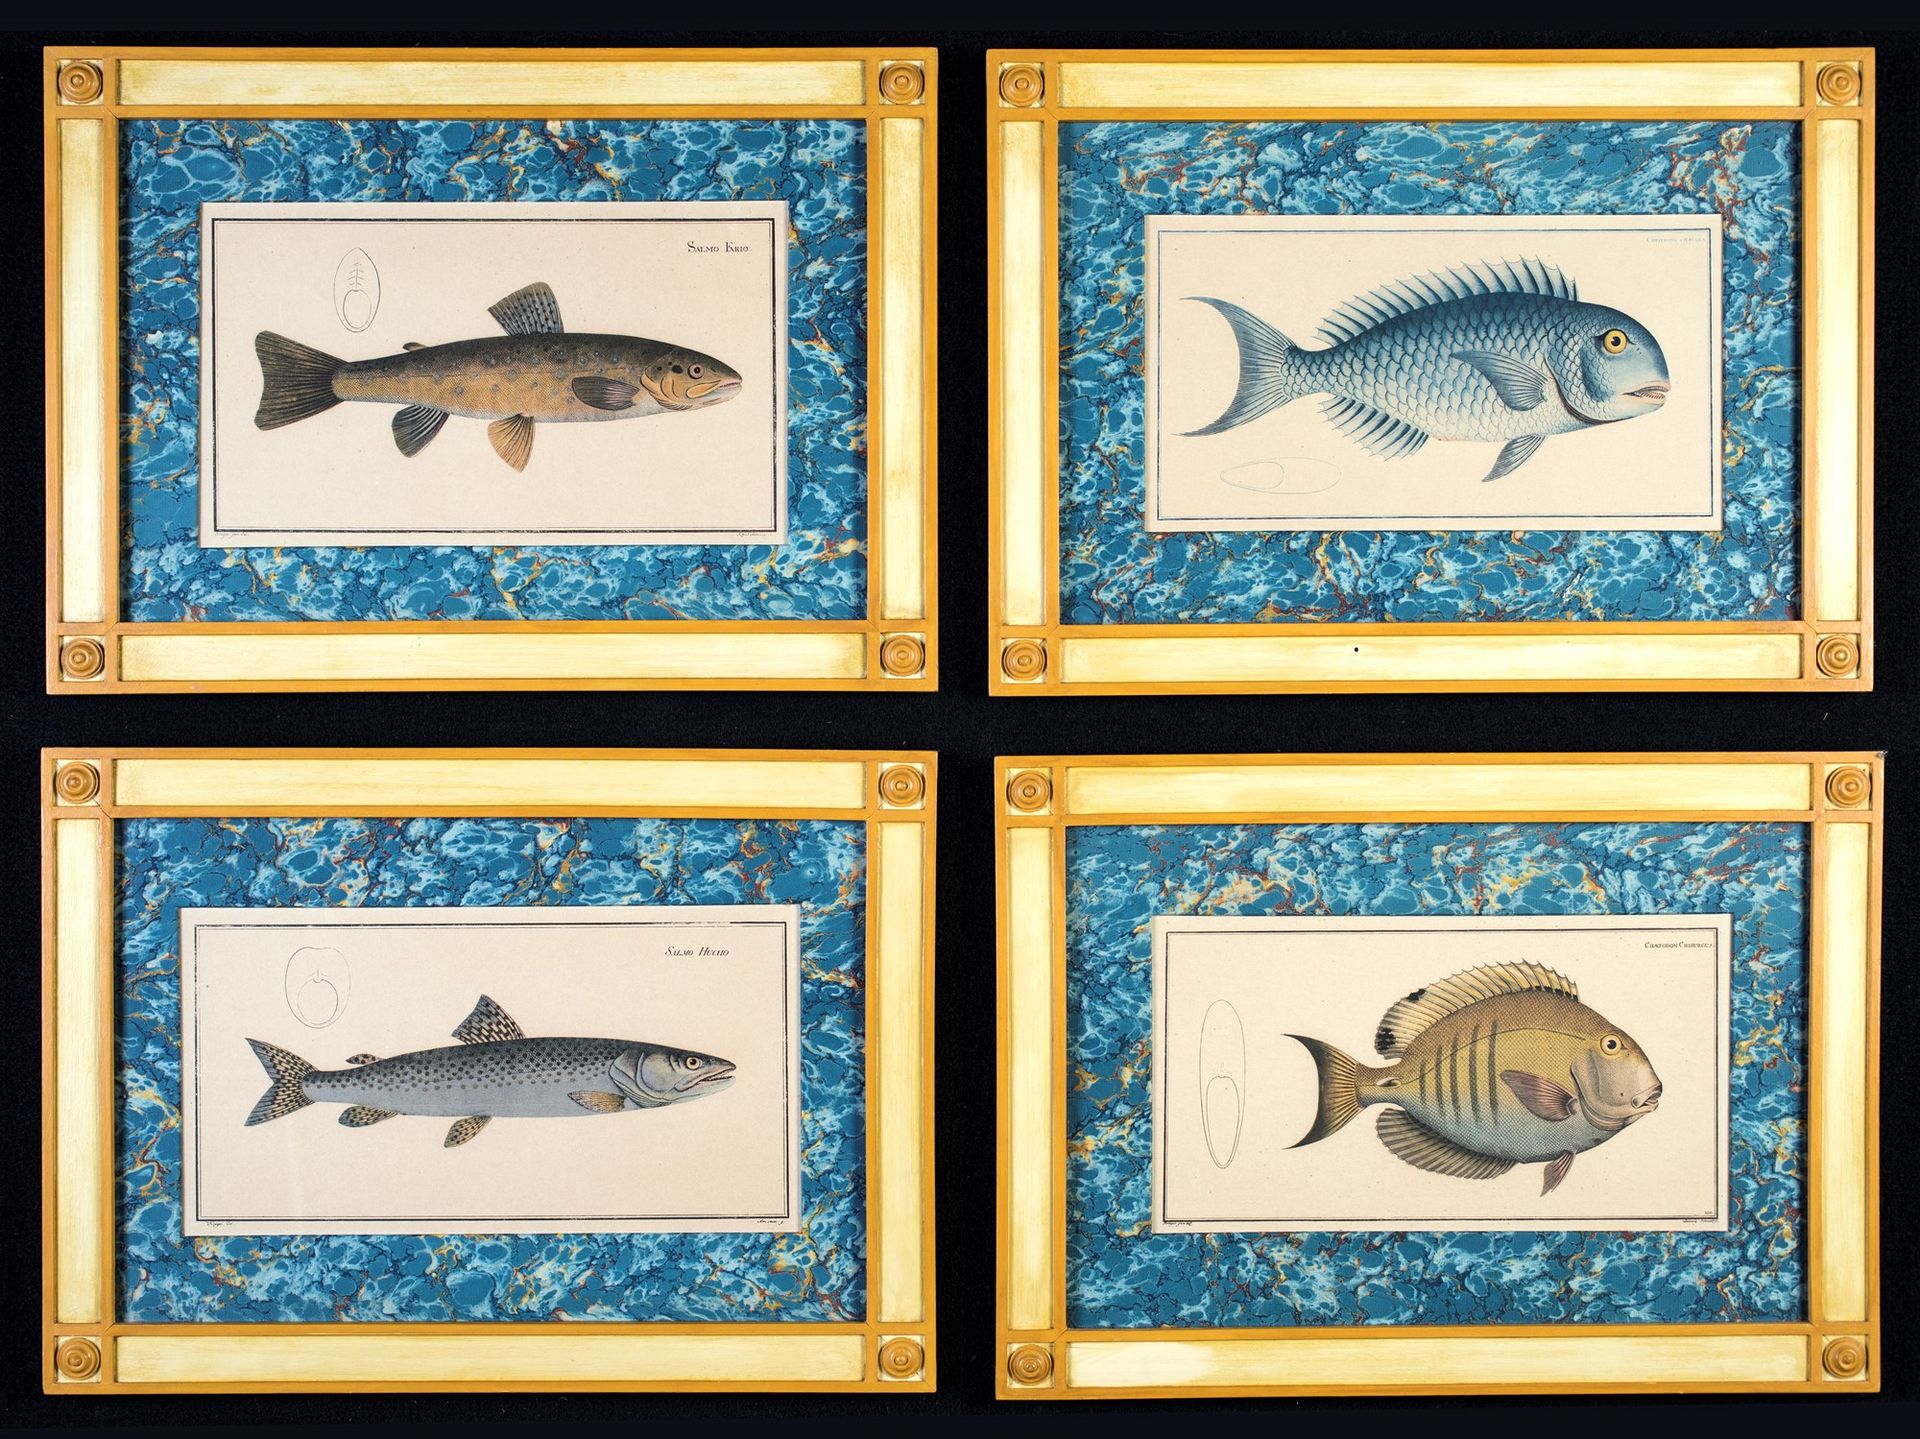 Four colorful fish prints reproducing the engravings taken from the work "Ichthy&hellip;